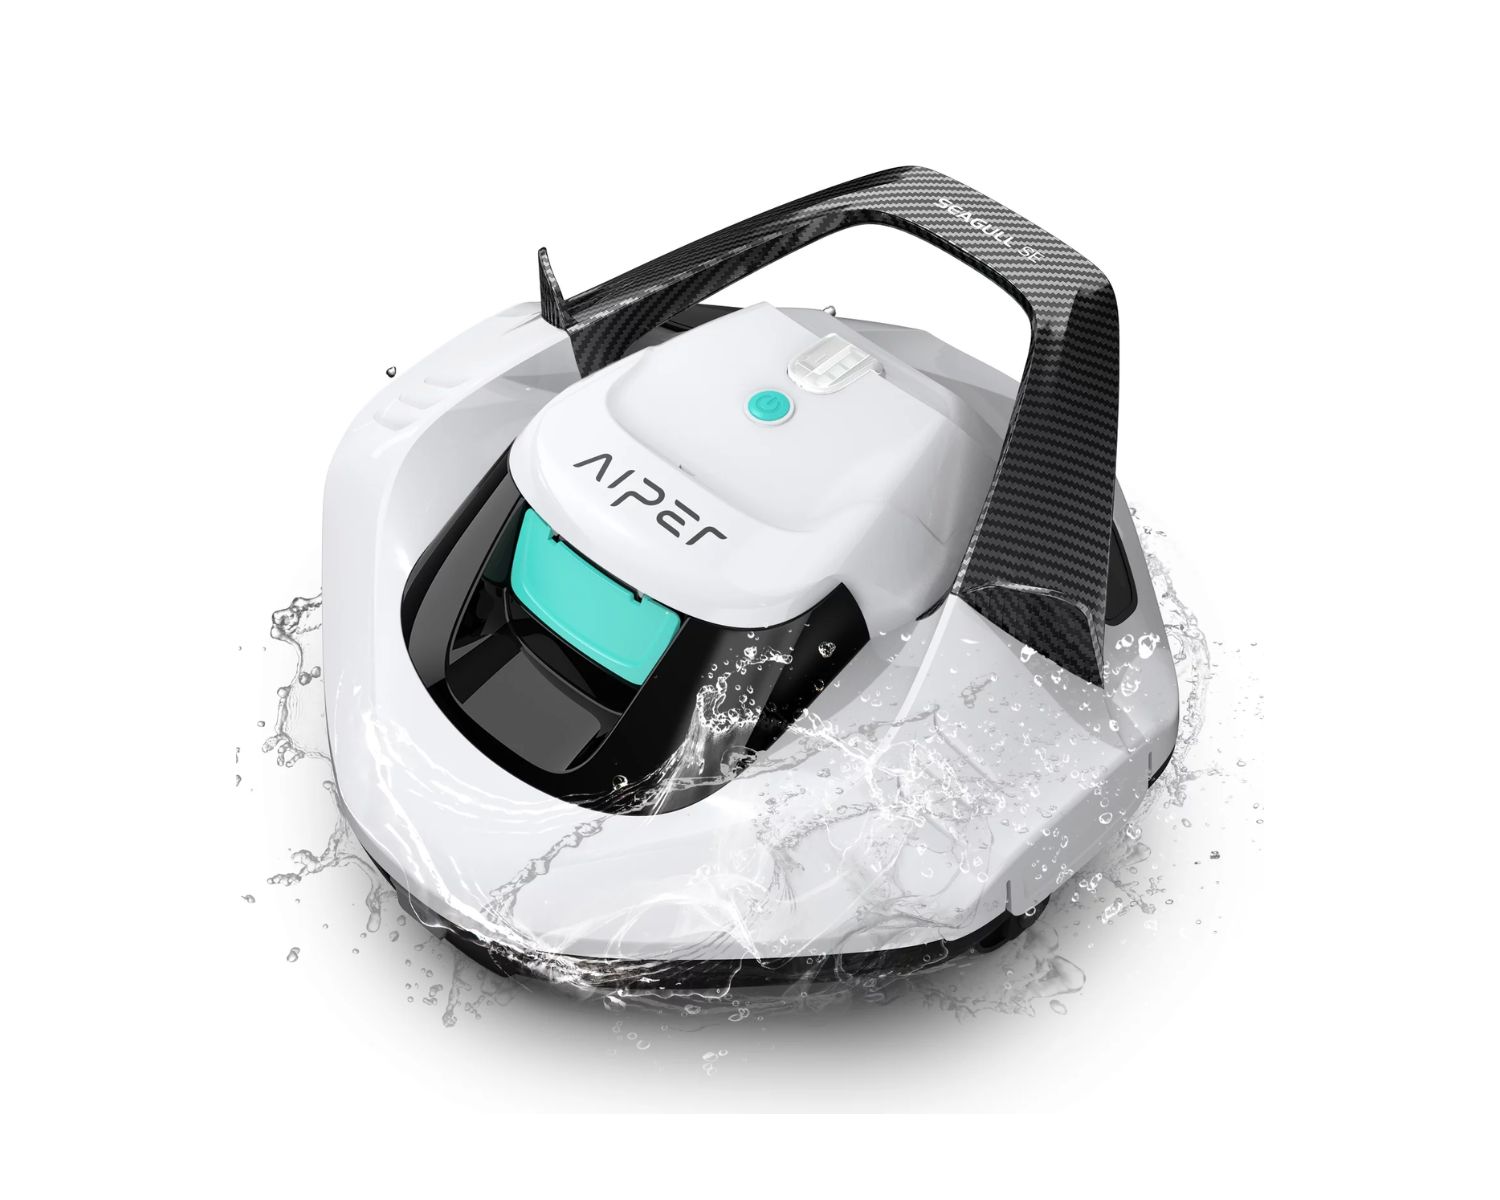 Lydsto P1 - Self Charging Cordless Robotic Pool Cleaner